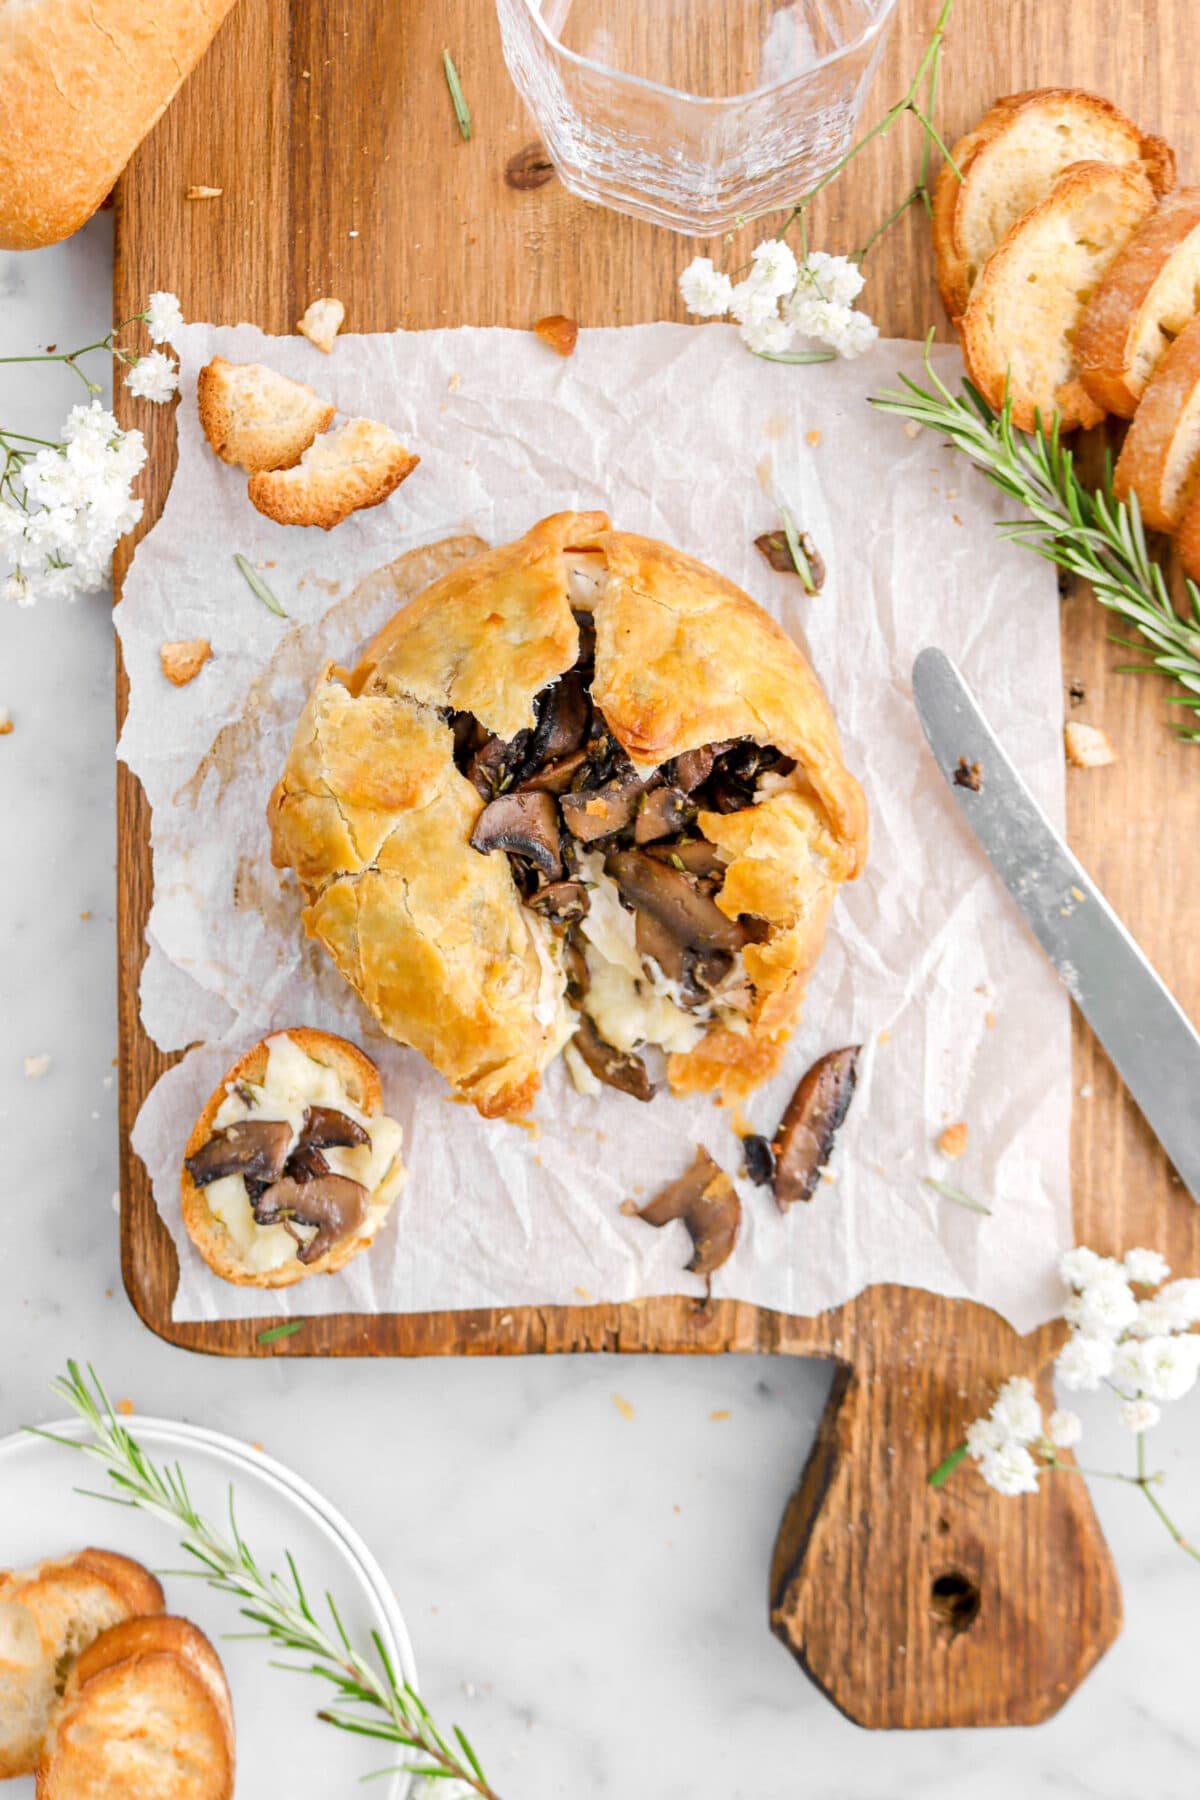 puff pastry wrapped brie with mushrooms on parchment paper on wood board with piece of bread with brie and mushrooms on top beside, rosemary sprigs, more pieces of bread, and a knife beside.